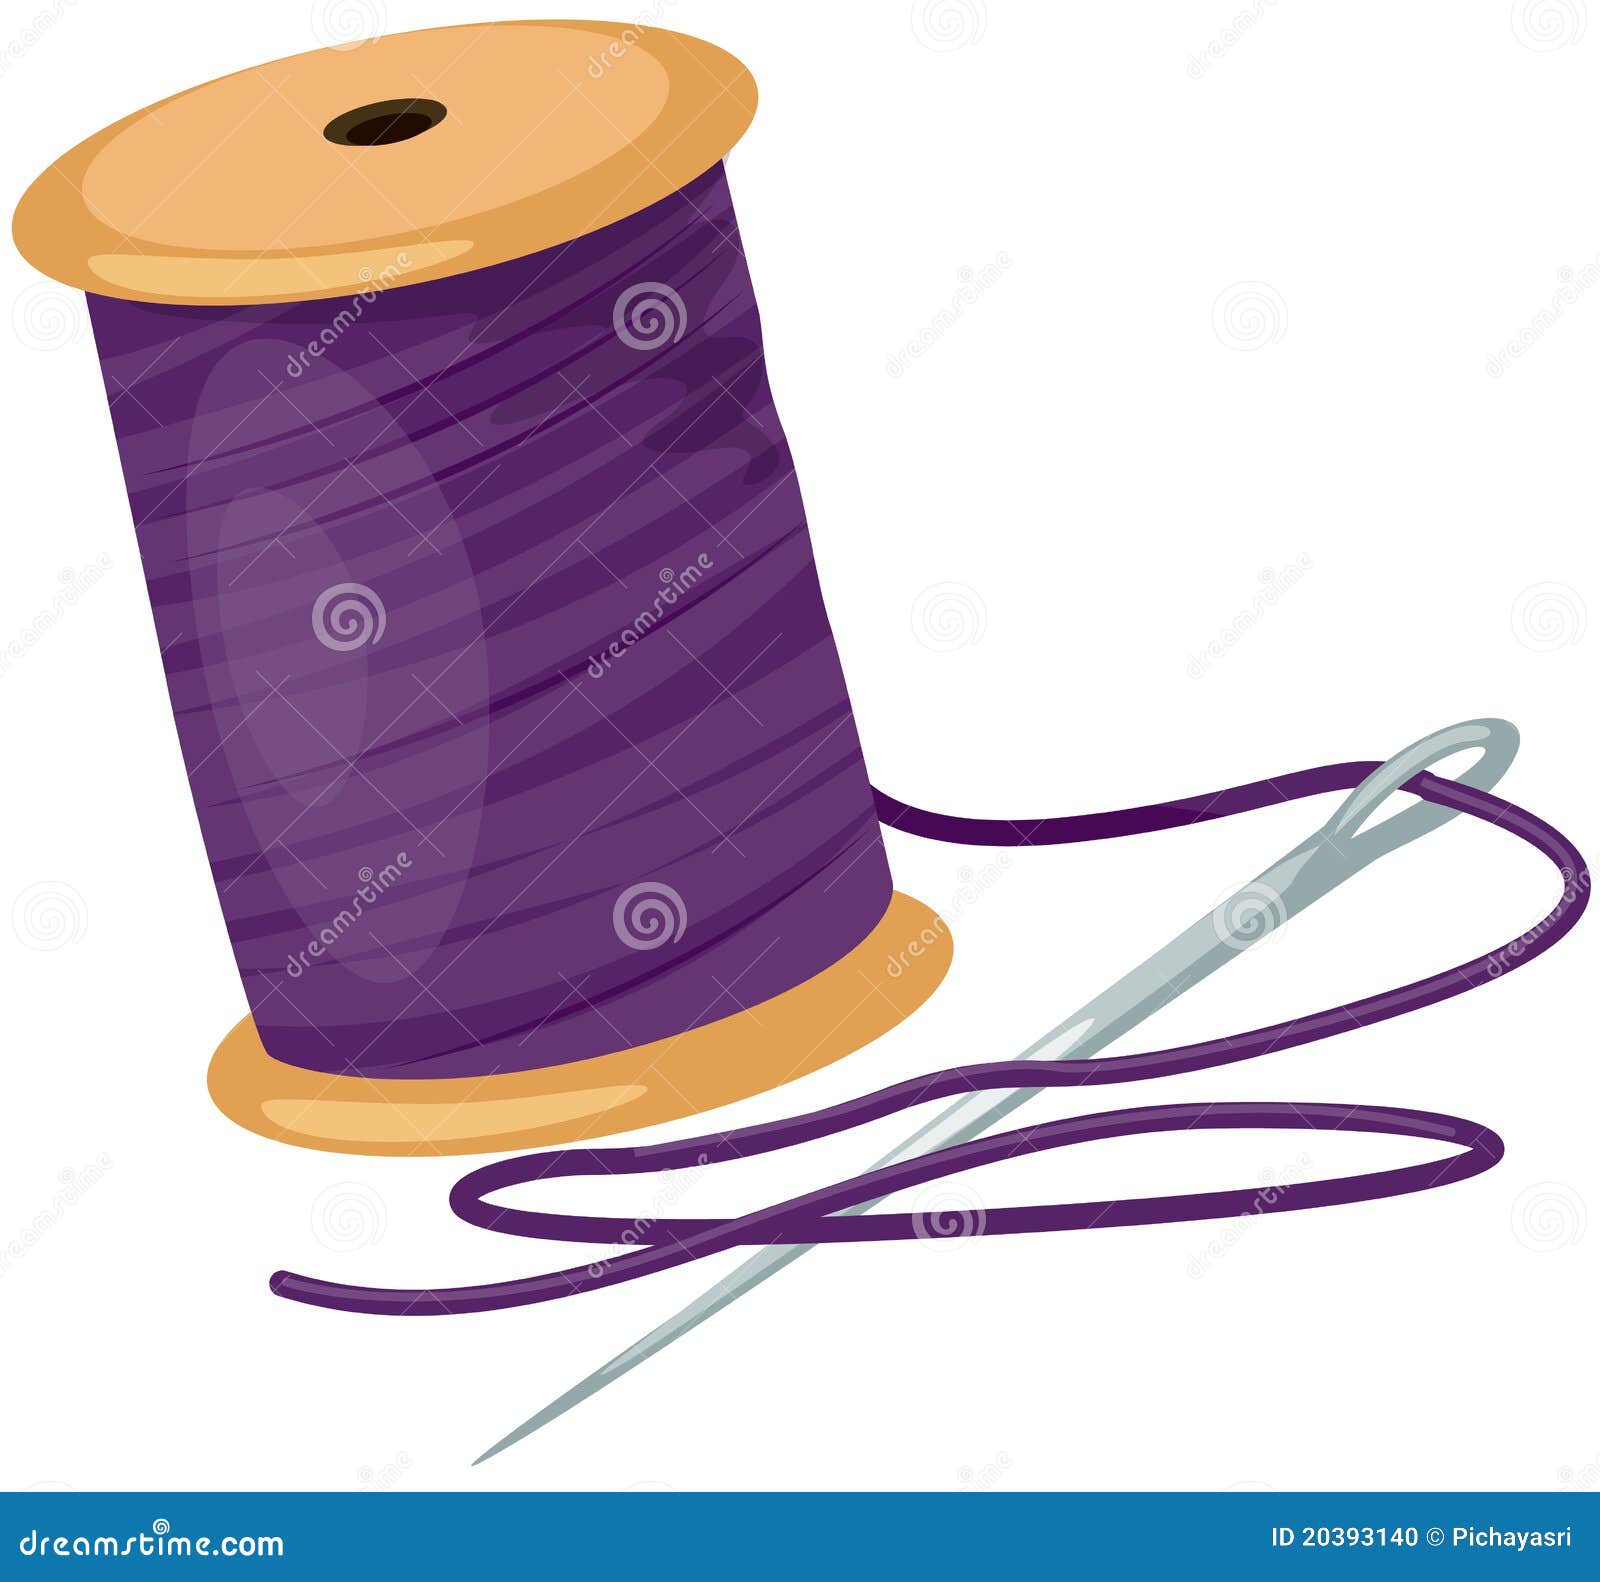 Download Spool With Threads And Needle Stock Vector - Illustration of craft, cartoon: 20393140